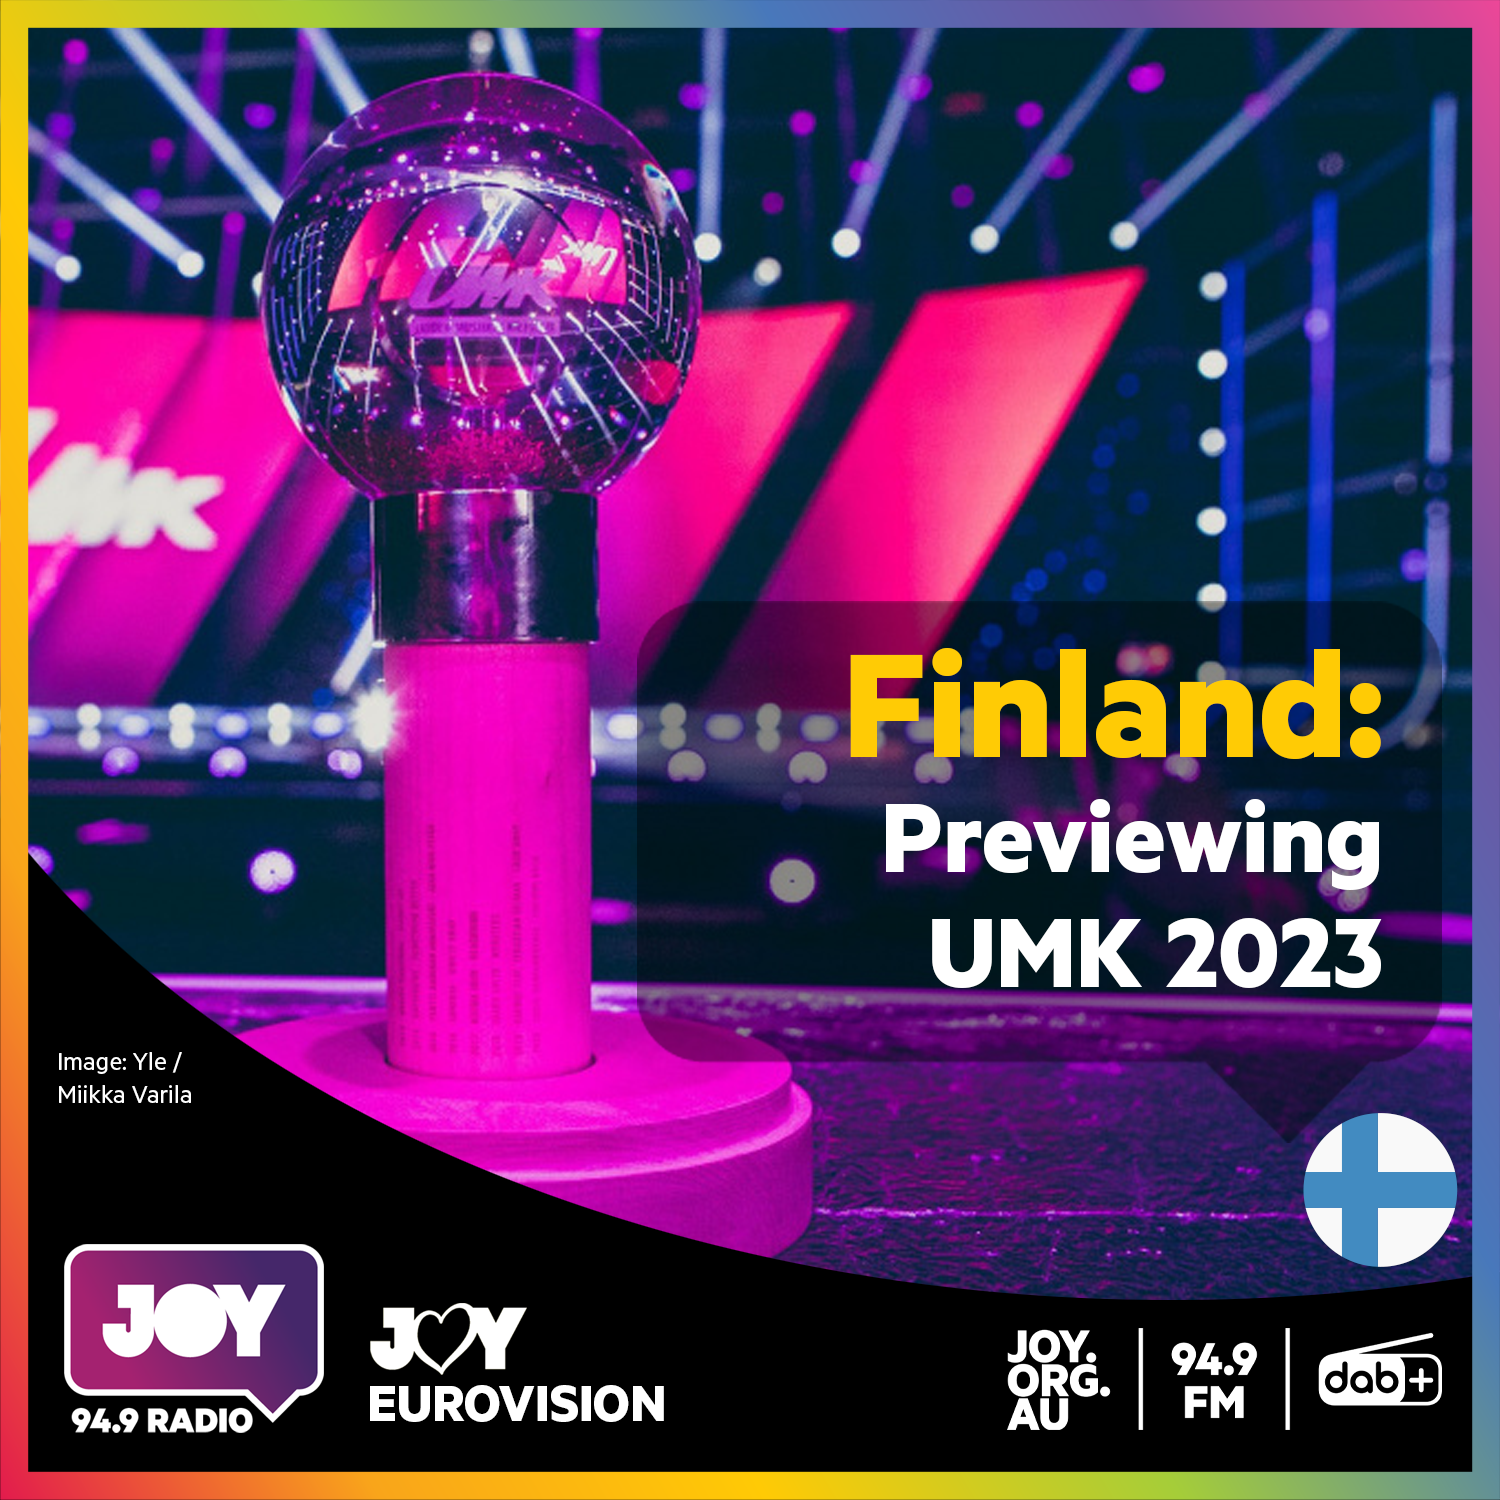 🇫🇮 Previewing UMK 2023: Finland’s glow up that the world needs